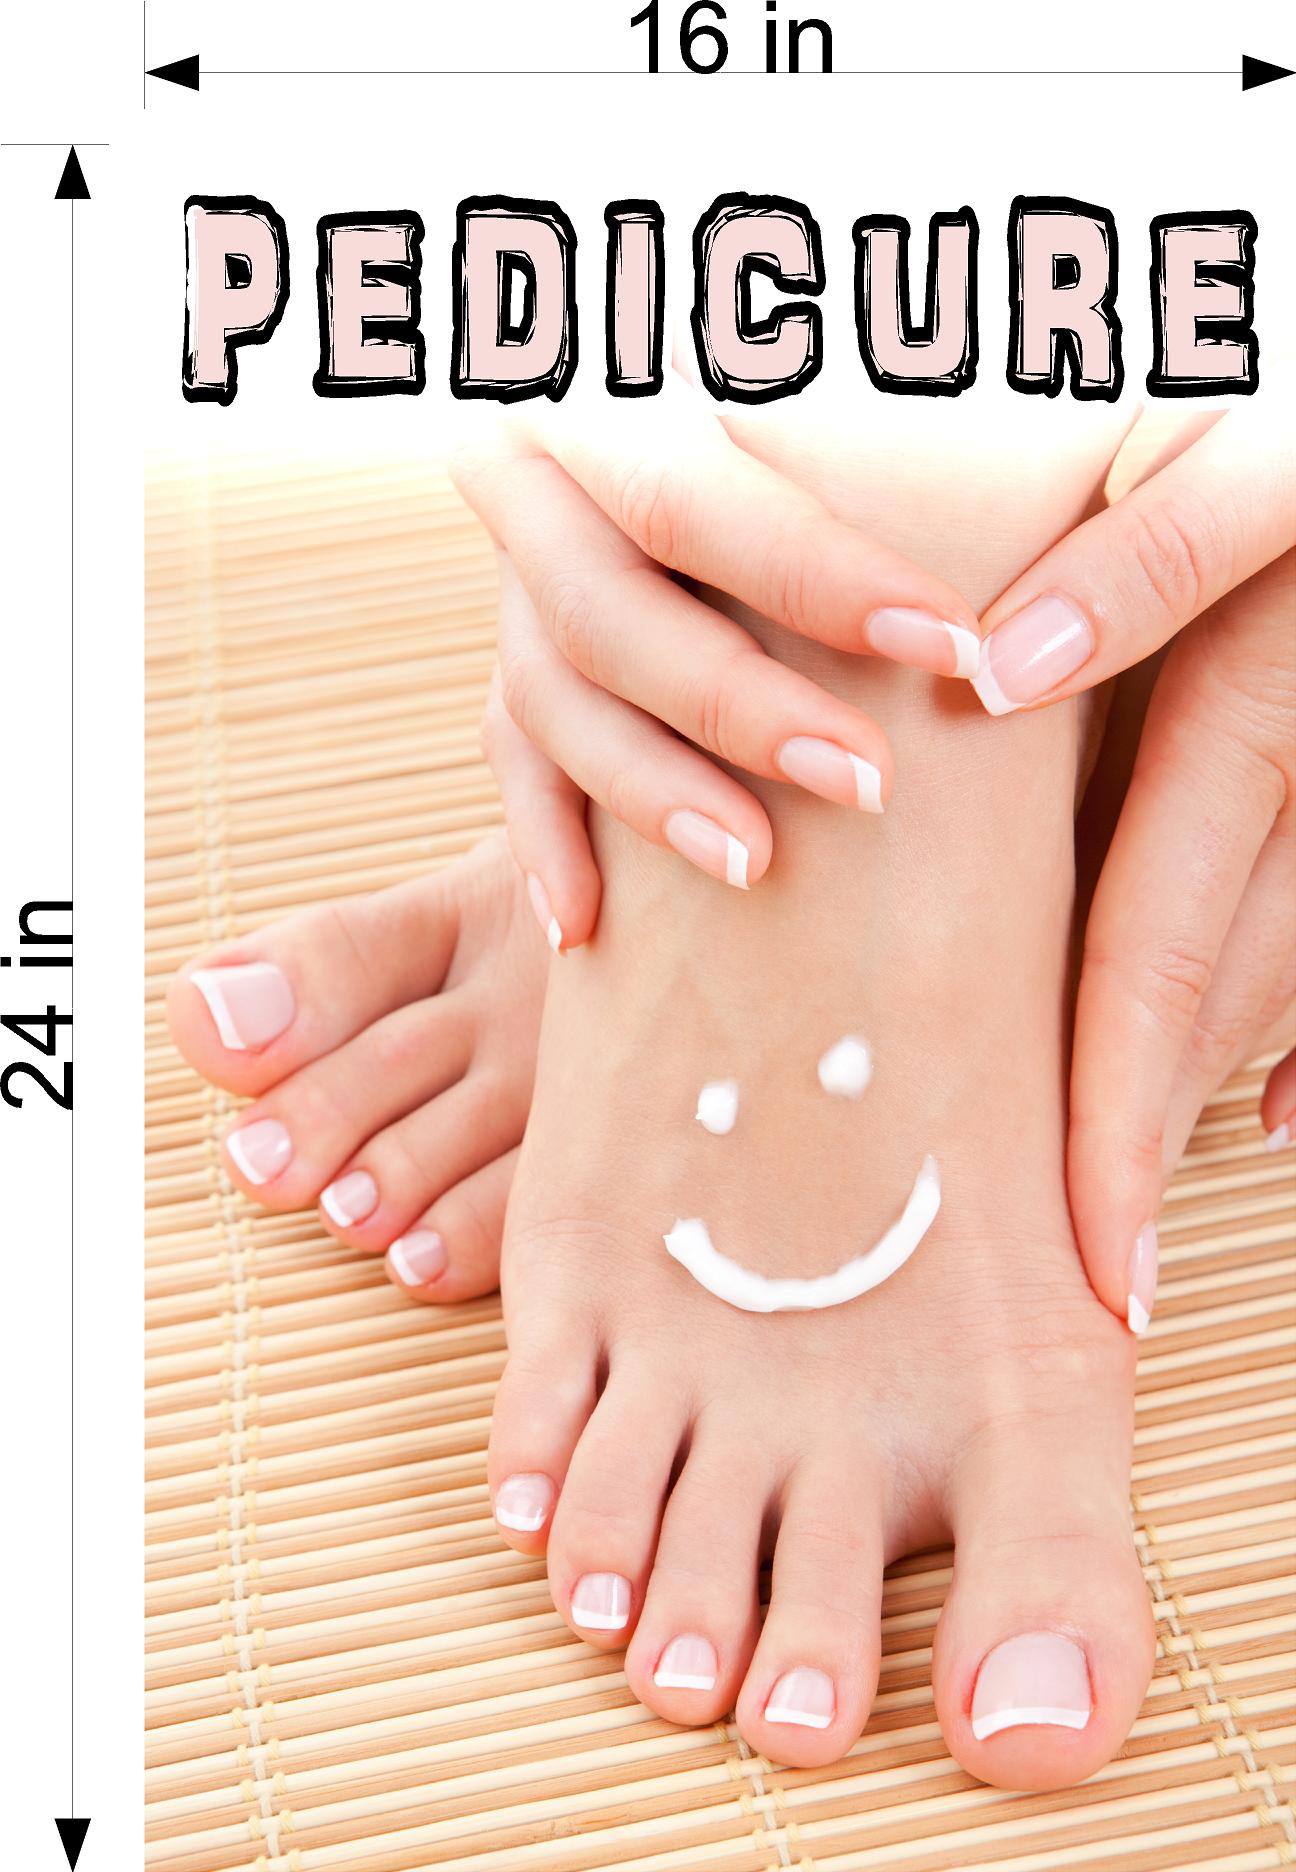 Pedicure 15 Wallpaper Poster Decal with Adhesive Backing Wall Sticker Decor Indoors Interior Sign Vertical